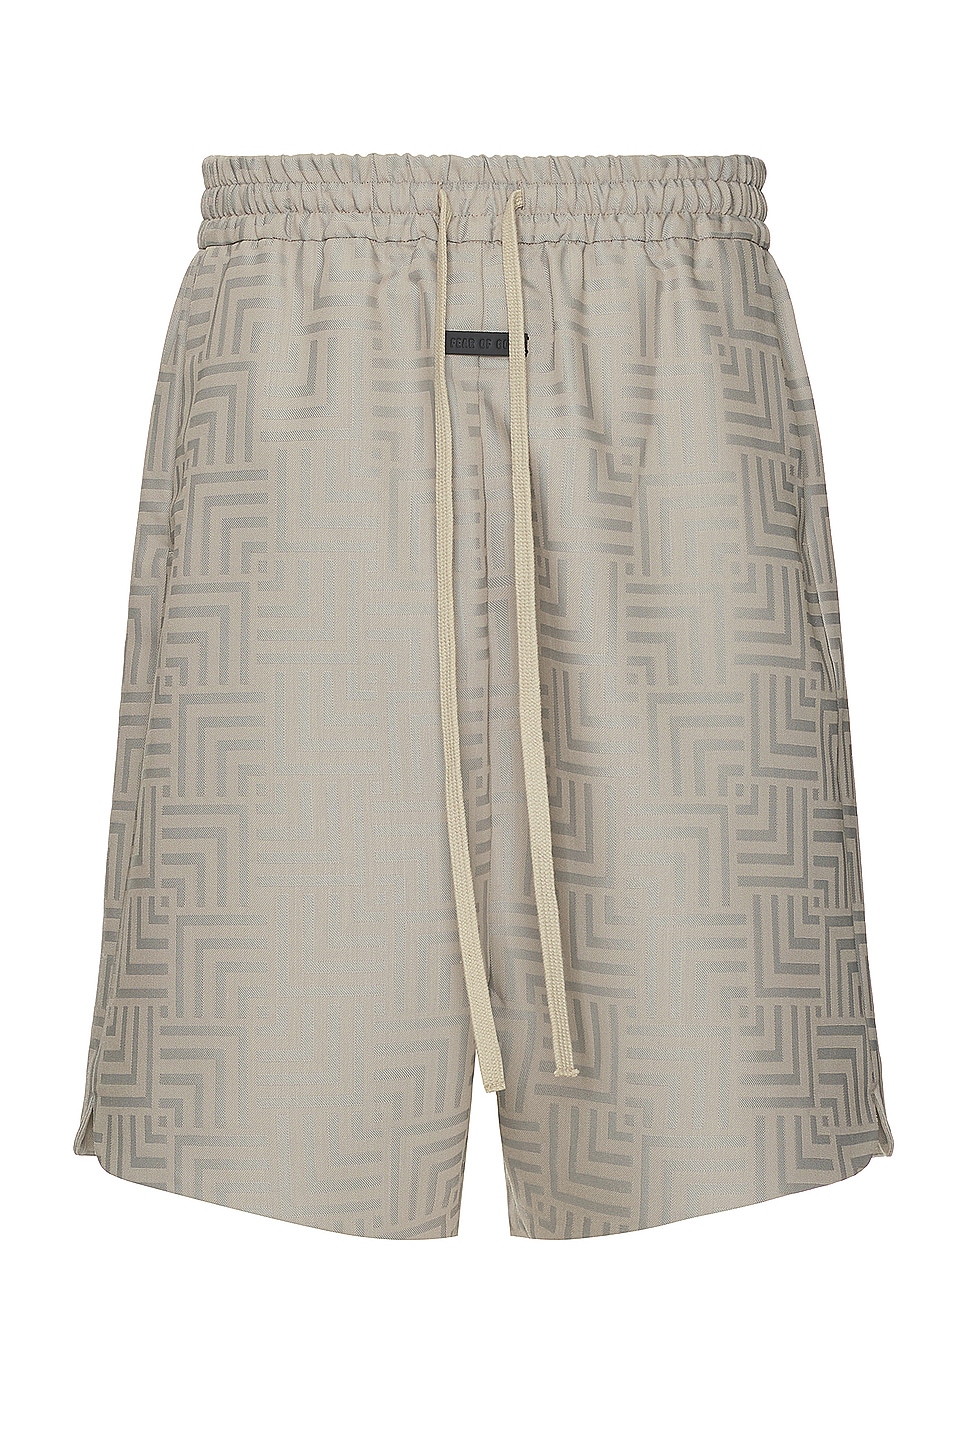 Image 1 of Fear of God Relaxed Short in Dove Grey